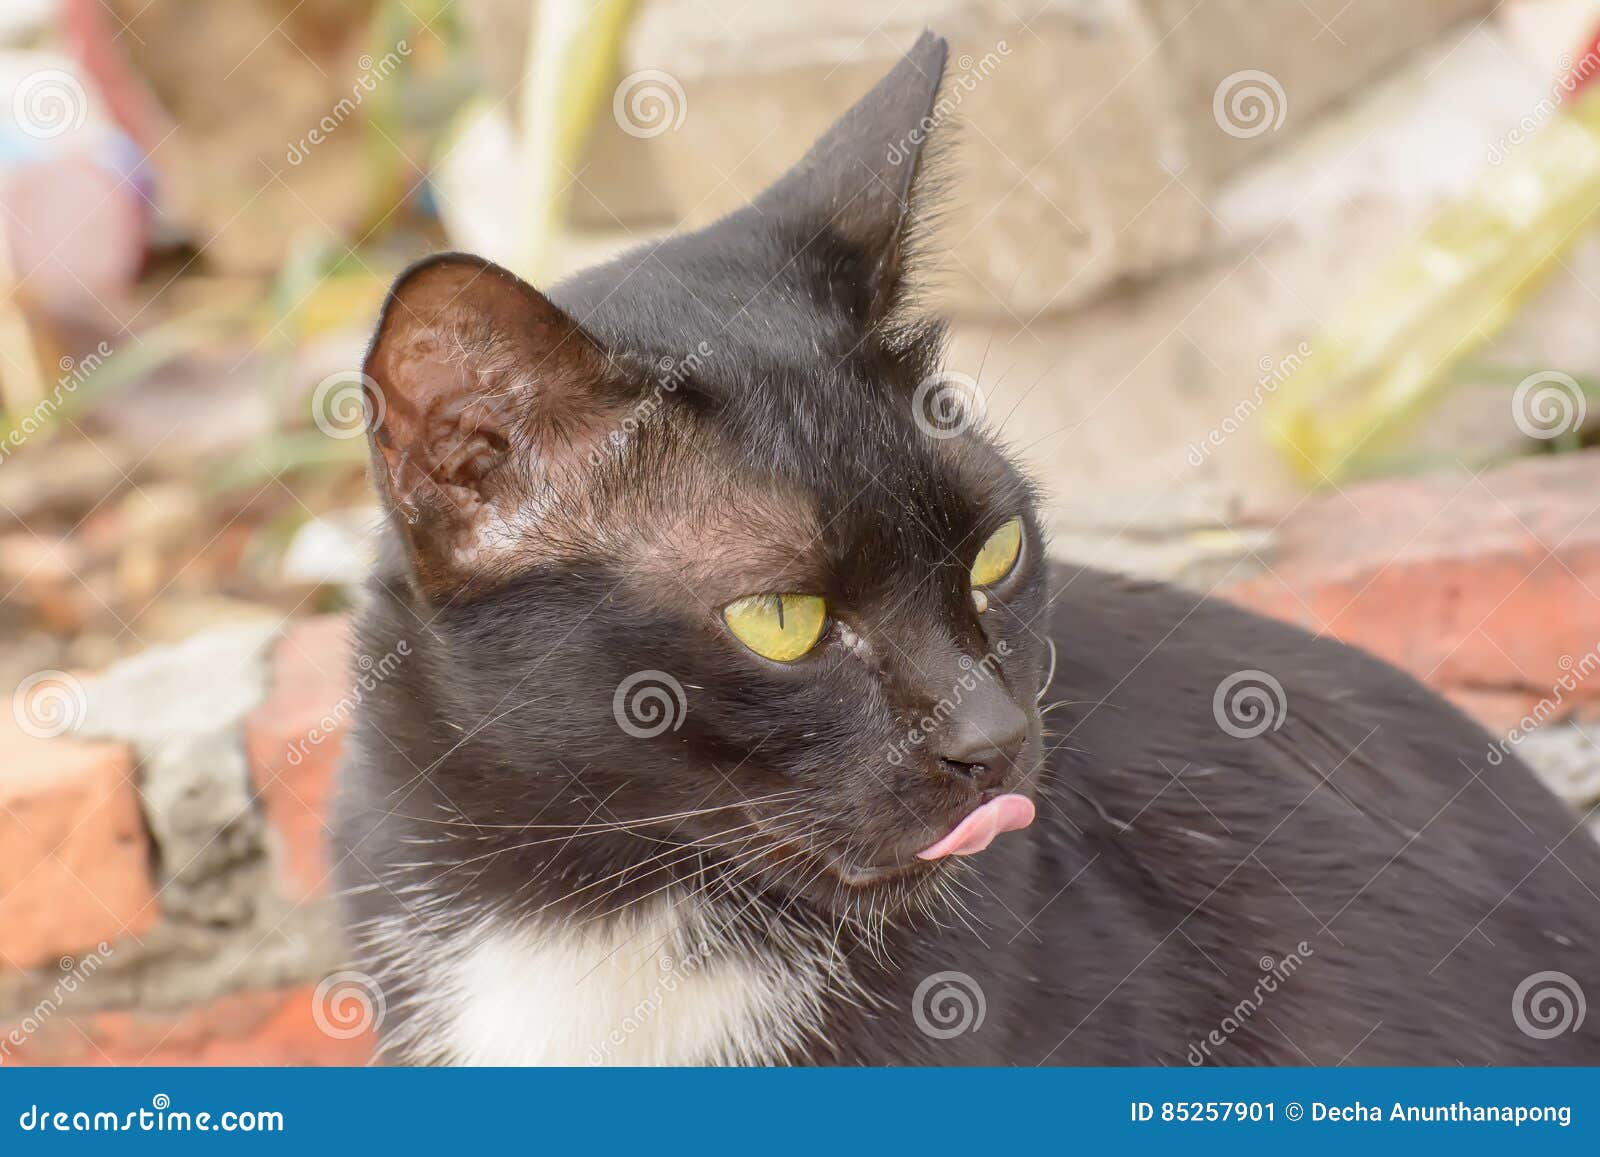 Eye boogers in cats stock image. Image of cats, funny 85257901